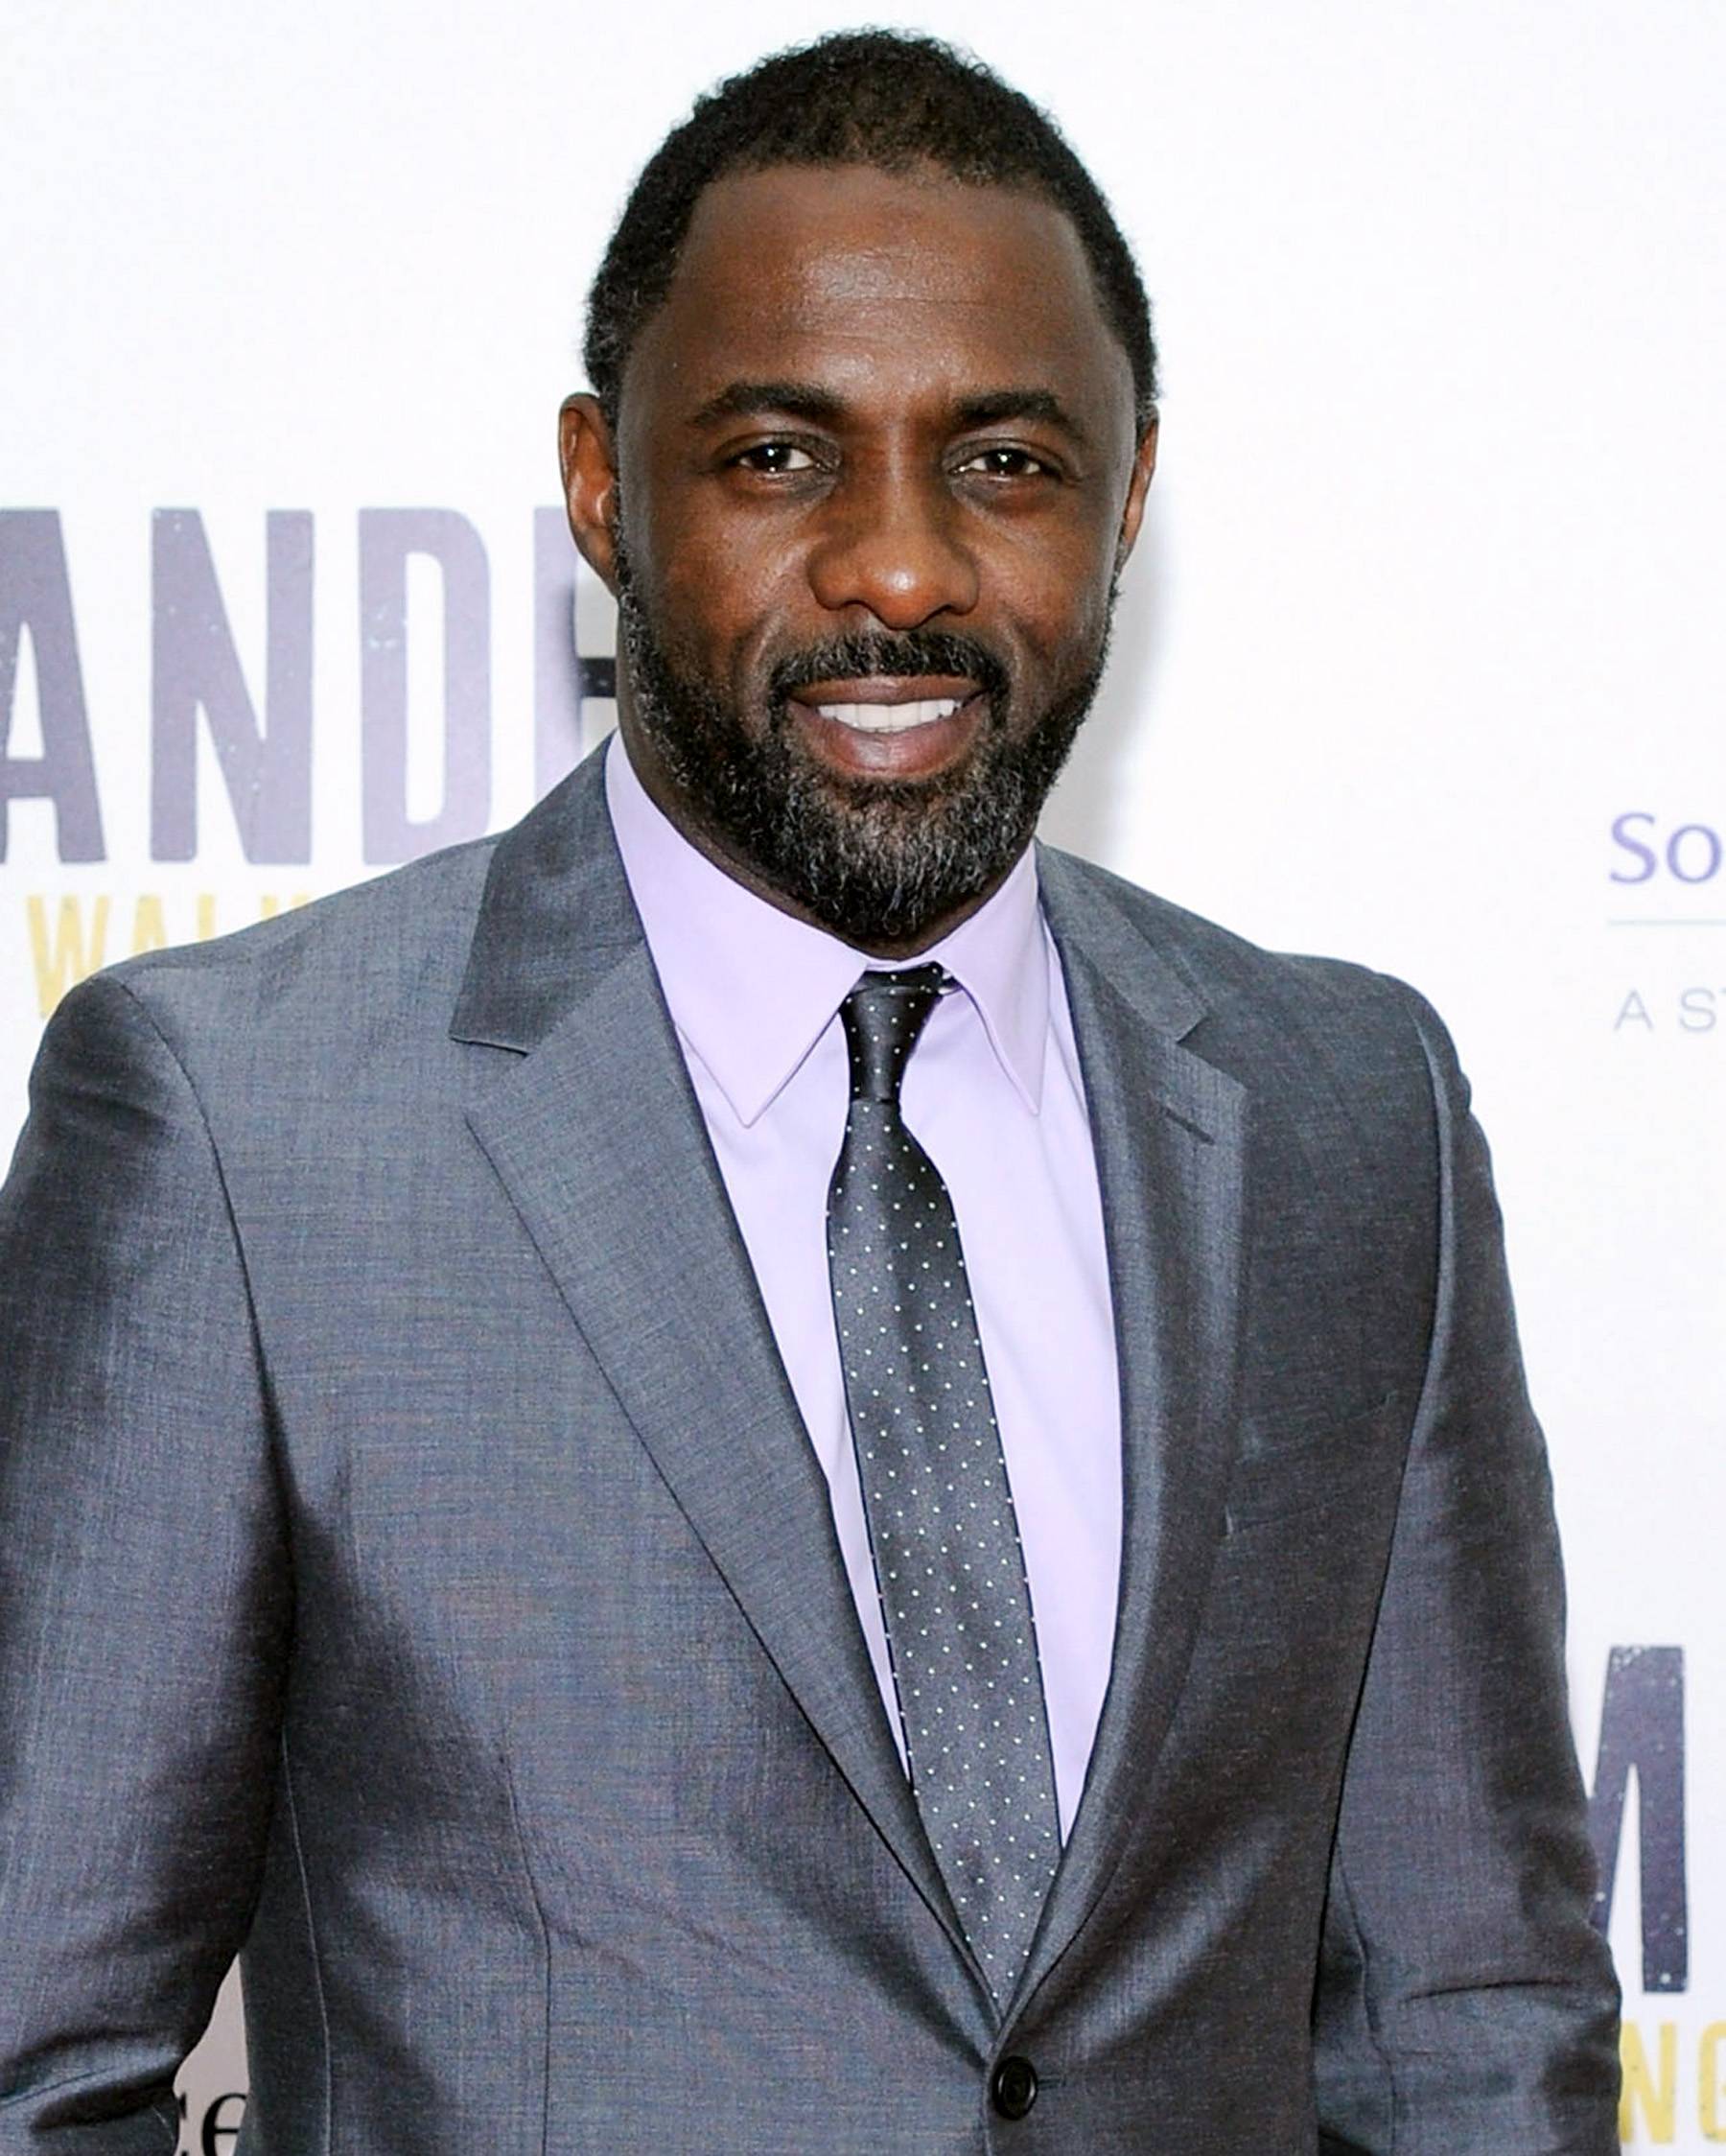 Idris Elba - Traveling over the pond and making his way to Brooklyn for a short time, this brit first turned heads for his acting in The Wire, but has caused pandemonium in the Mandela biopic, Mandela: Long Walk to Freedom which hit theaters on Christmas of 2013.(Photo: Ilya S. Savenok/Getty Images)